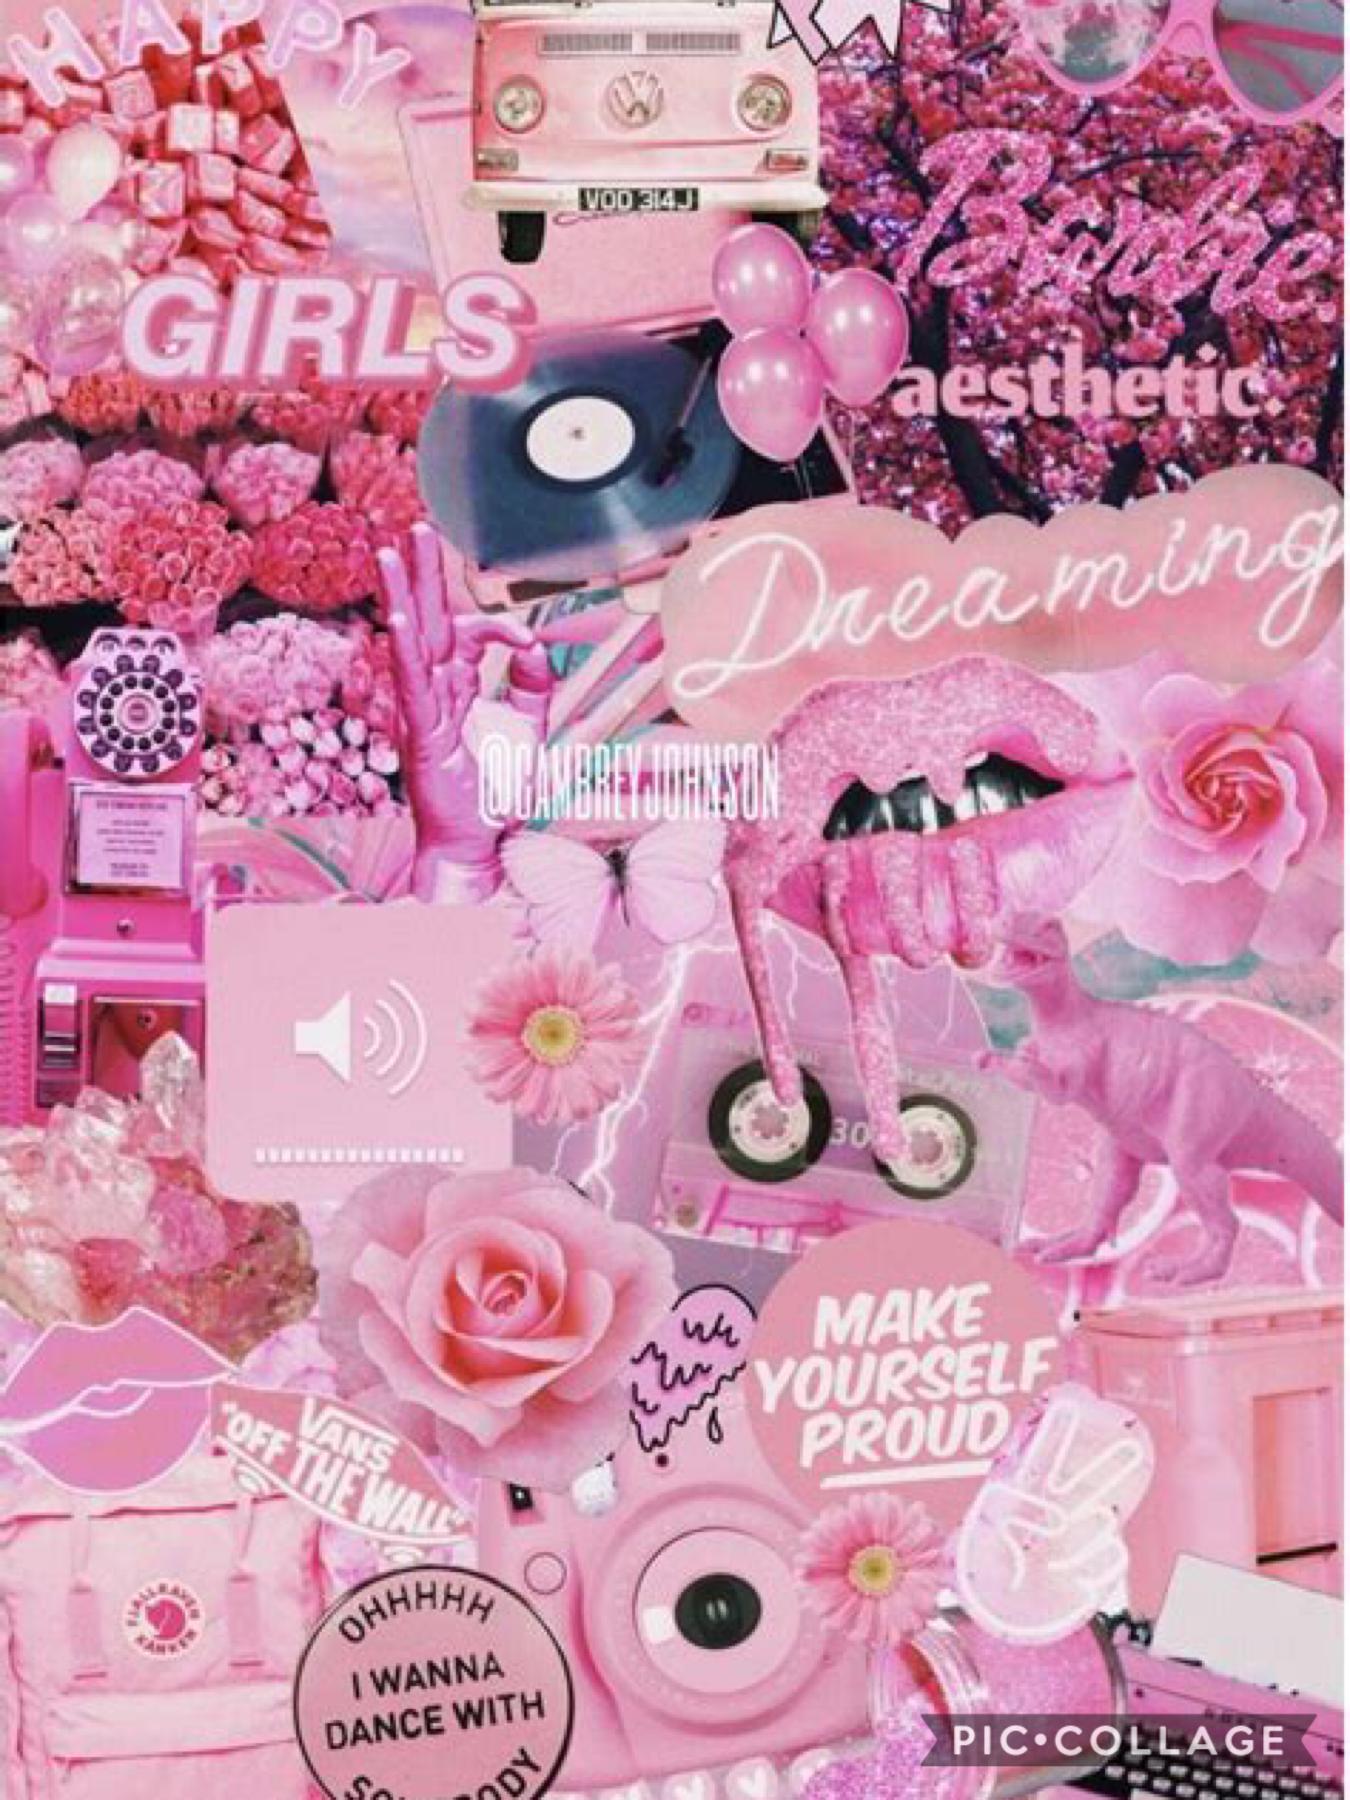 P I N K 👄👅🧠👩🏻‍🎤💅🏼👚👛🐽🐷 recommend colours!